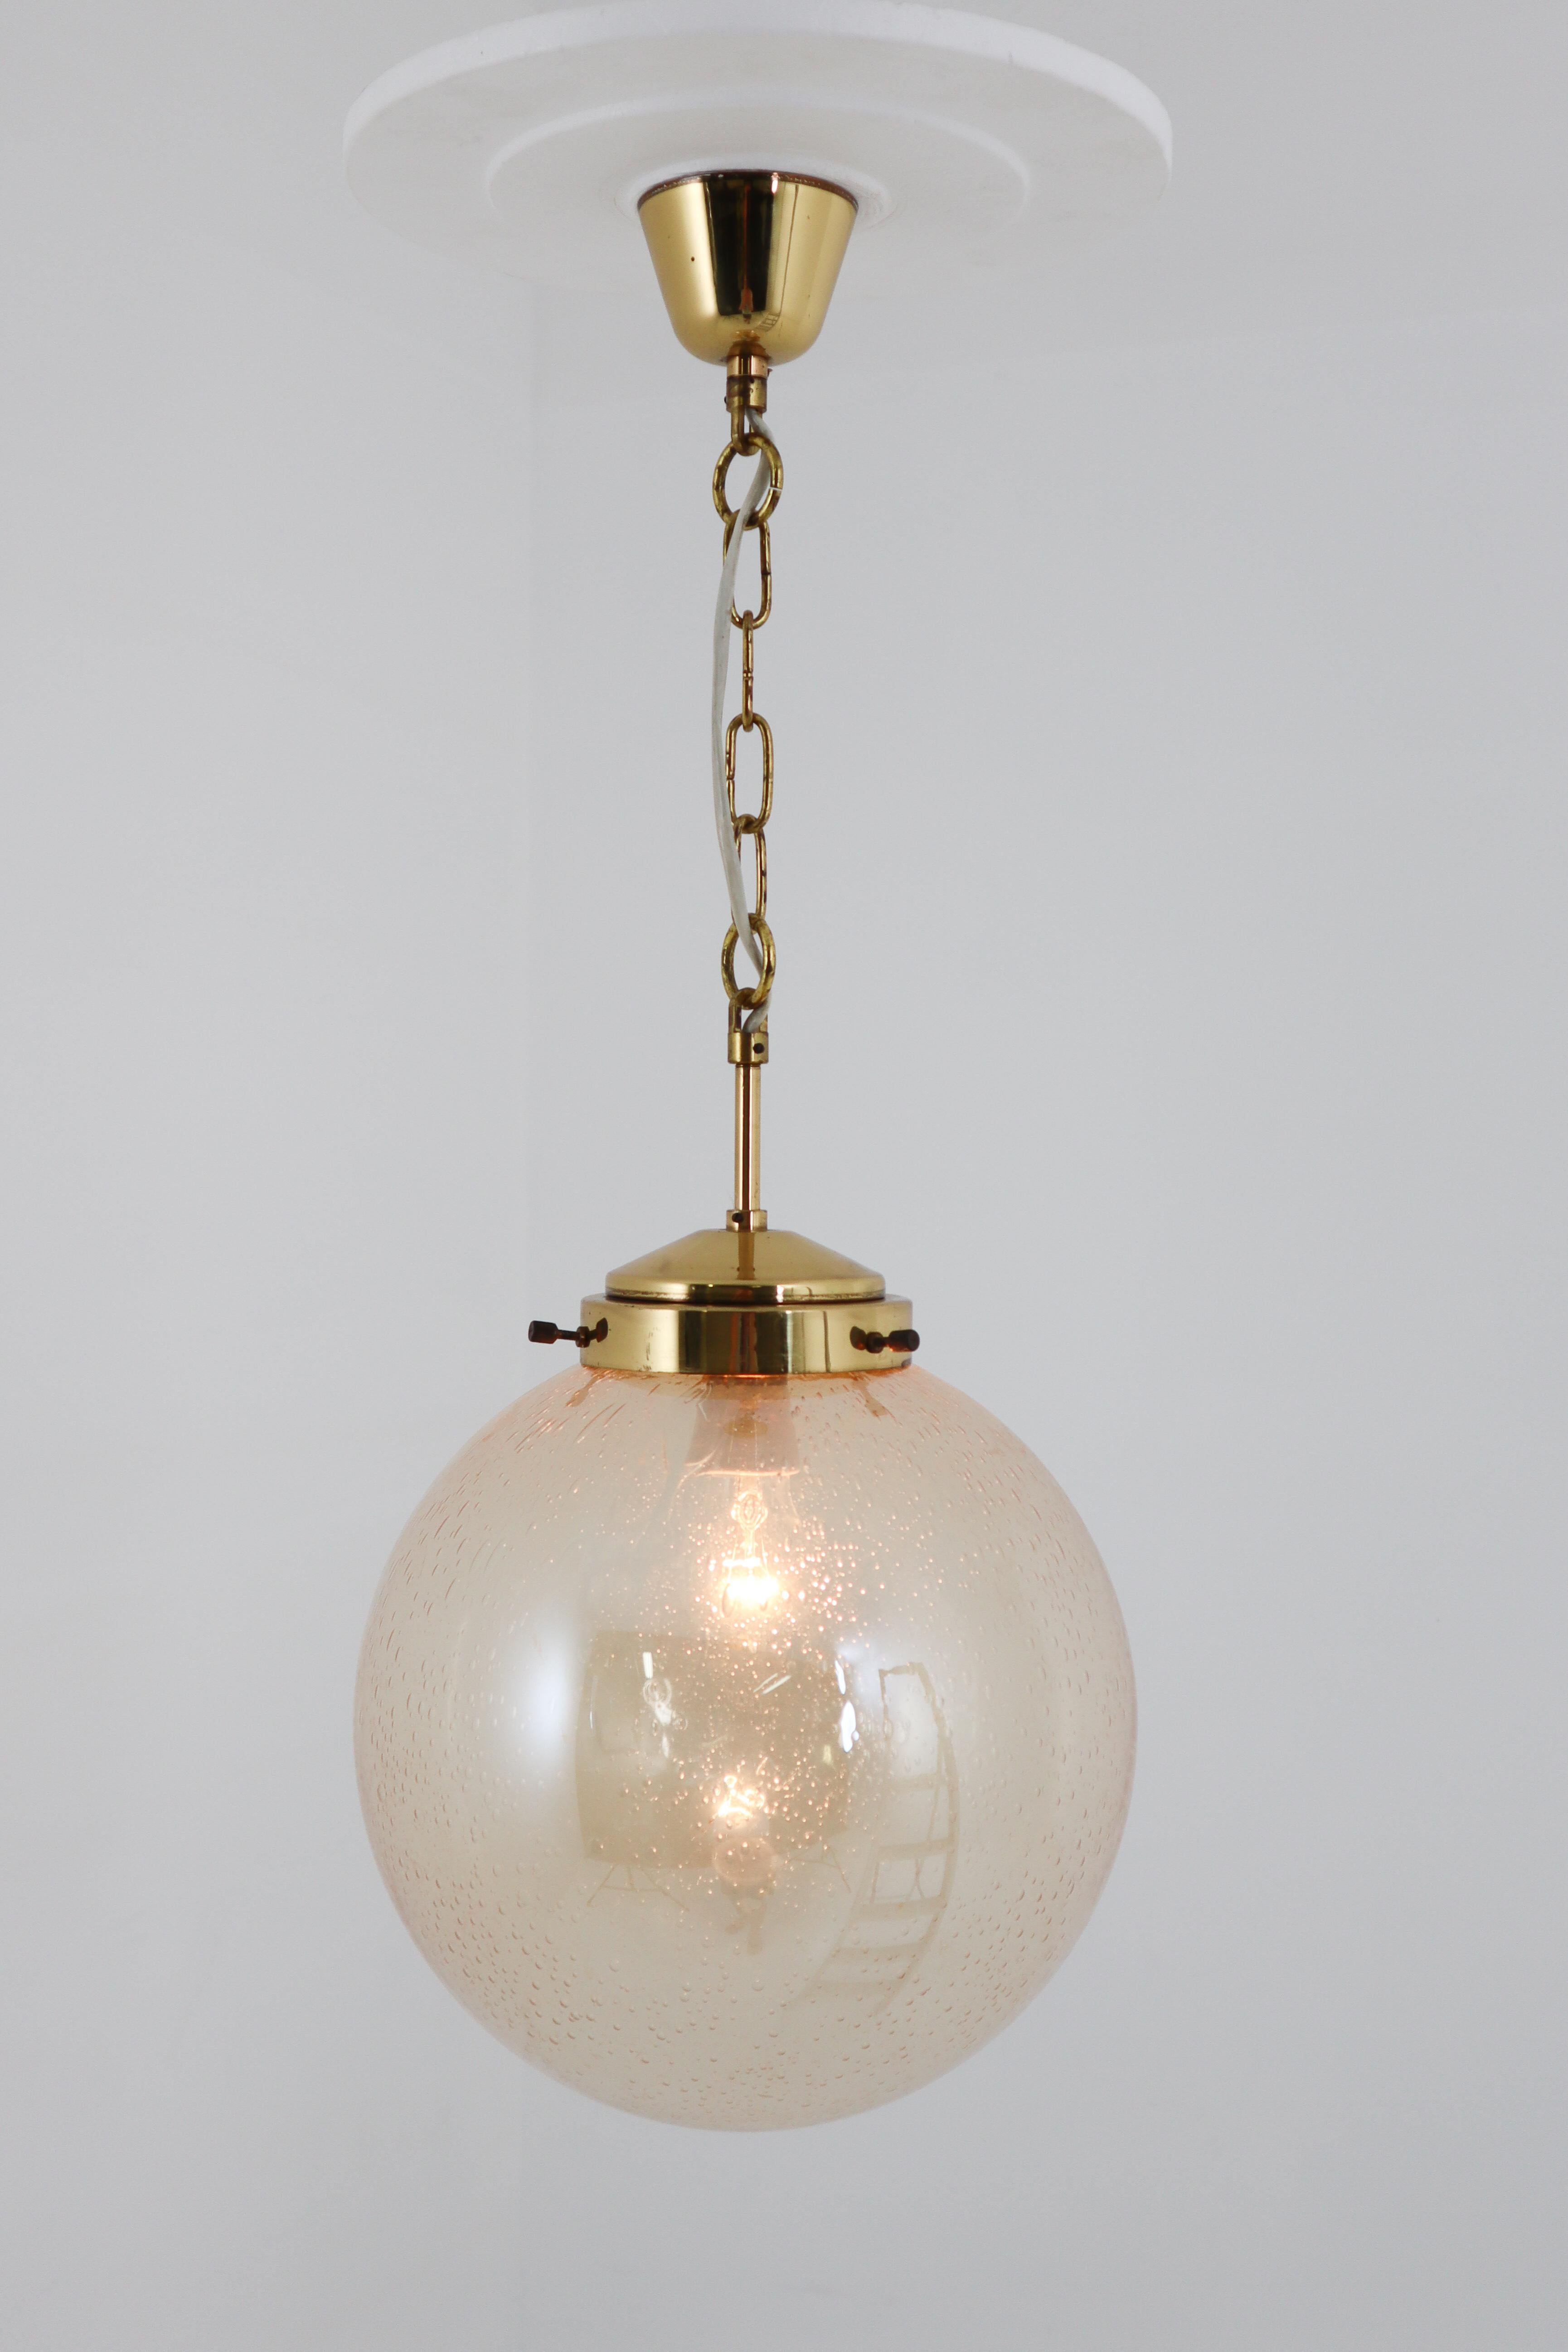 German Set of Two Globe Pendant Lights, Brass and Smoked Glass, 1970s For Sale